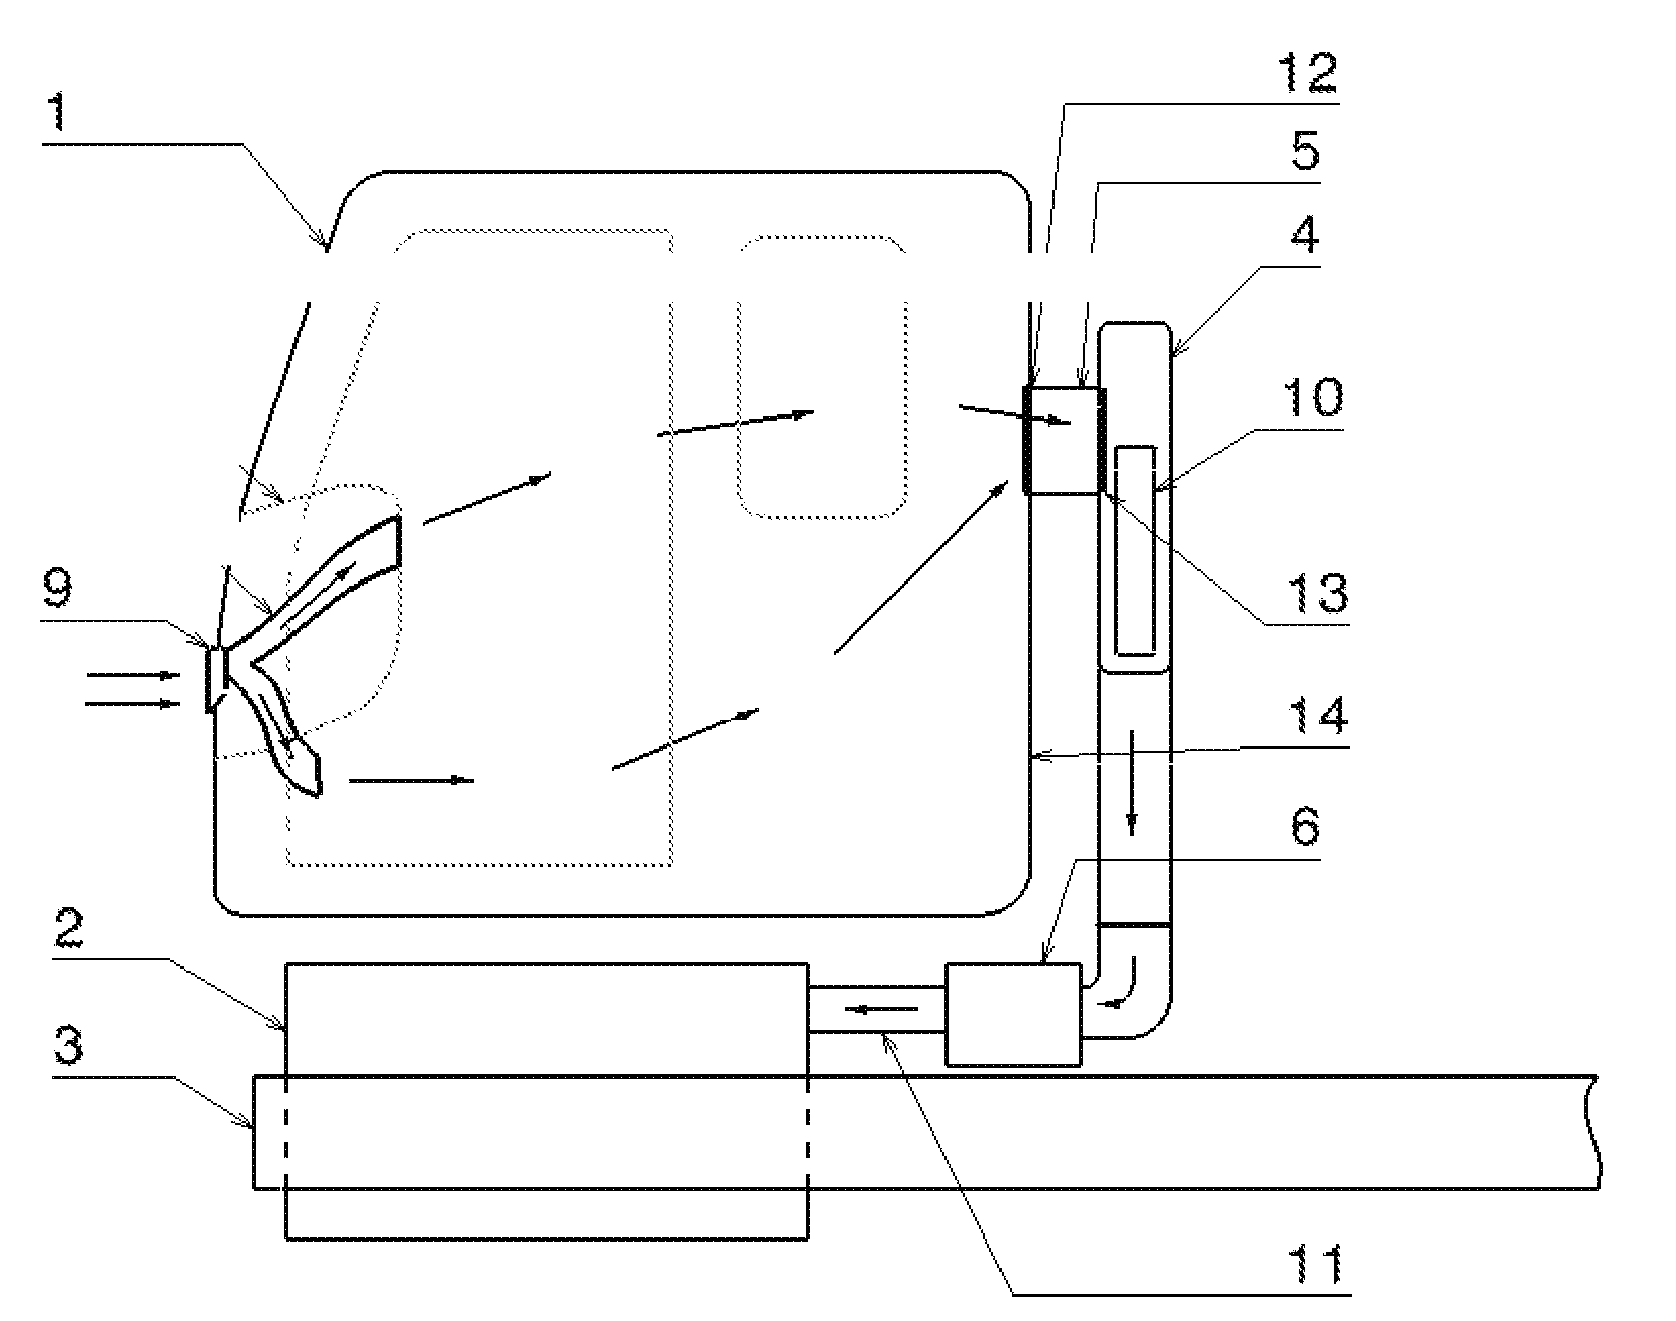 Natural air ventilation system for a vehicle cab